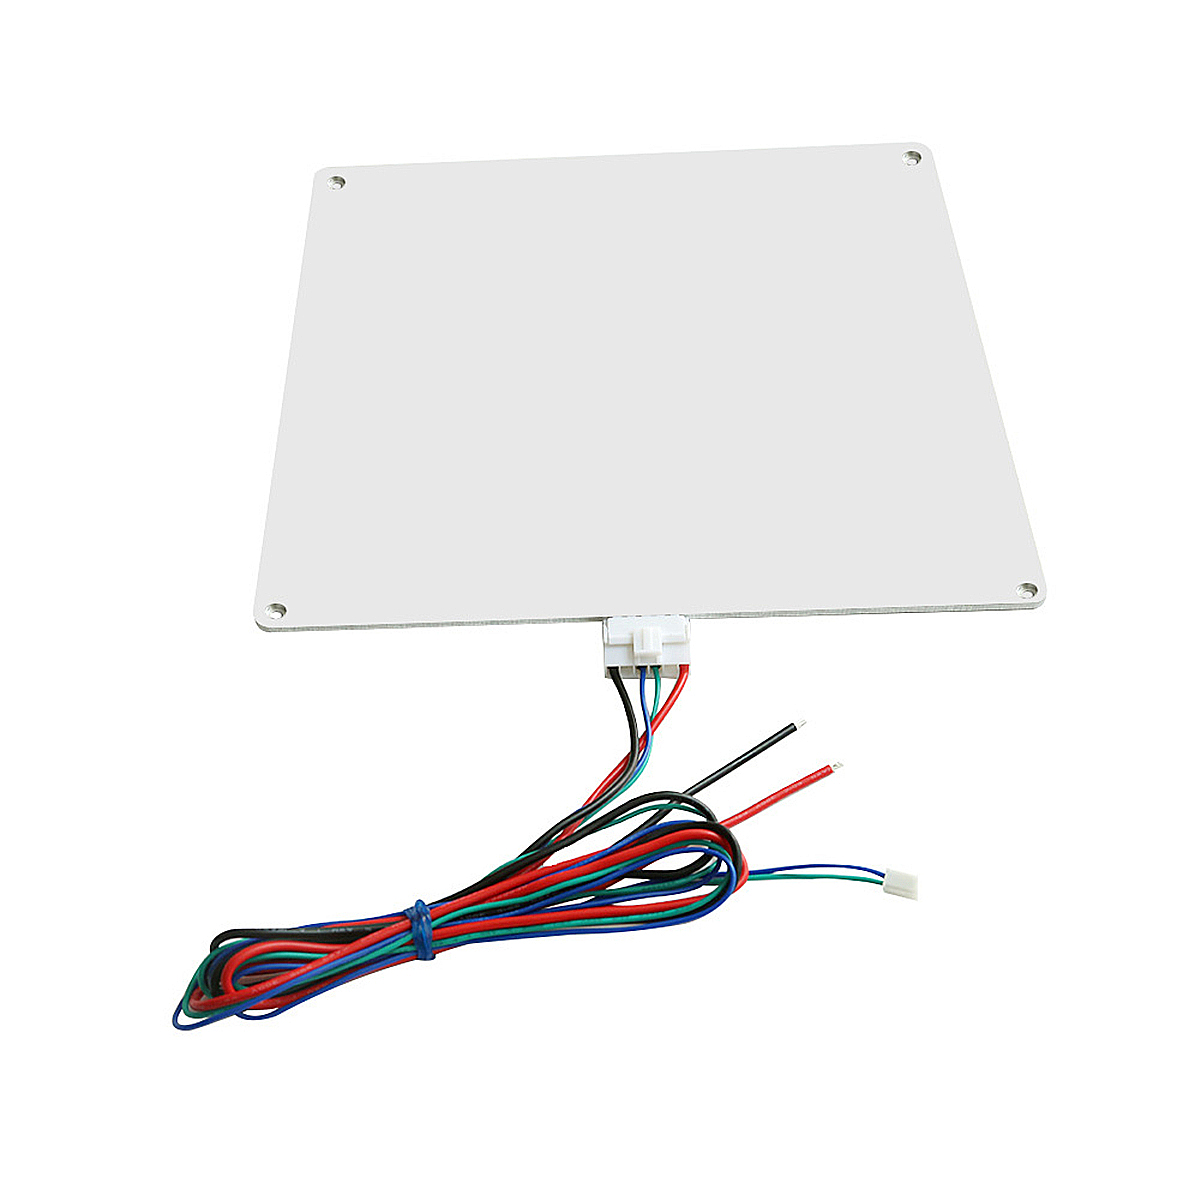 Anetreg-220x220x3mm-120W-12V-MK3-Aluminum-Board-PCB-Heated-Bed-With-Wire-For-3D-Printer-1975604-2